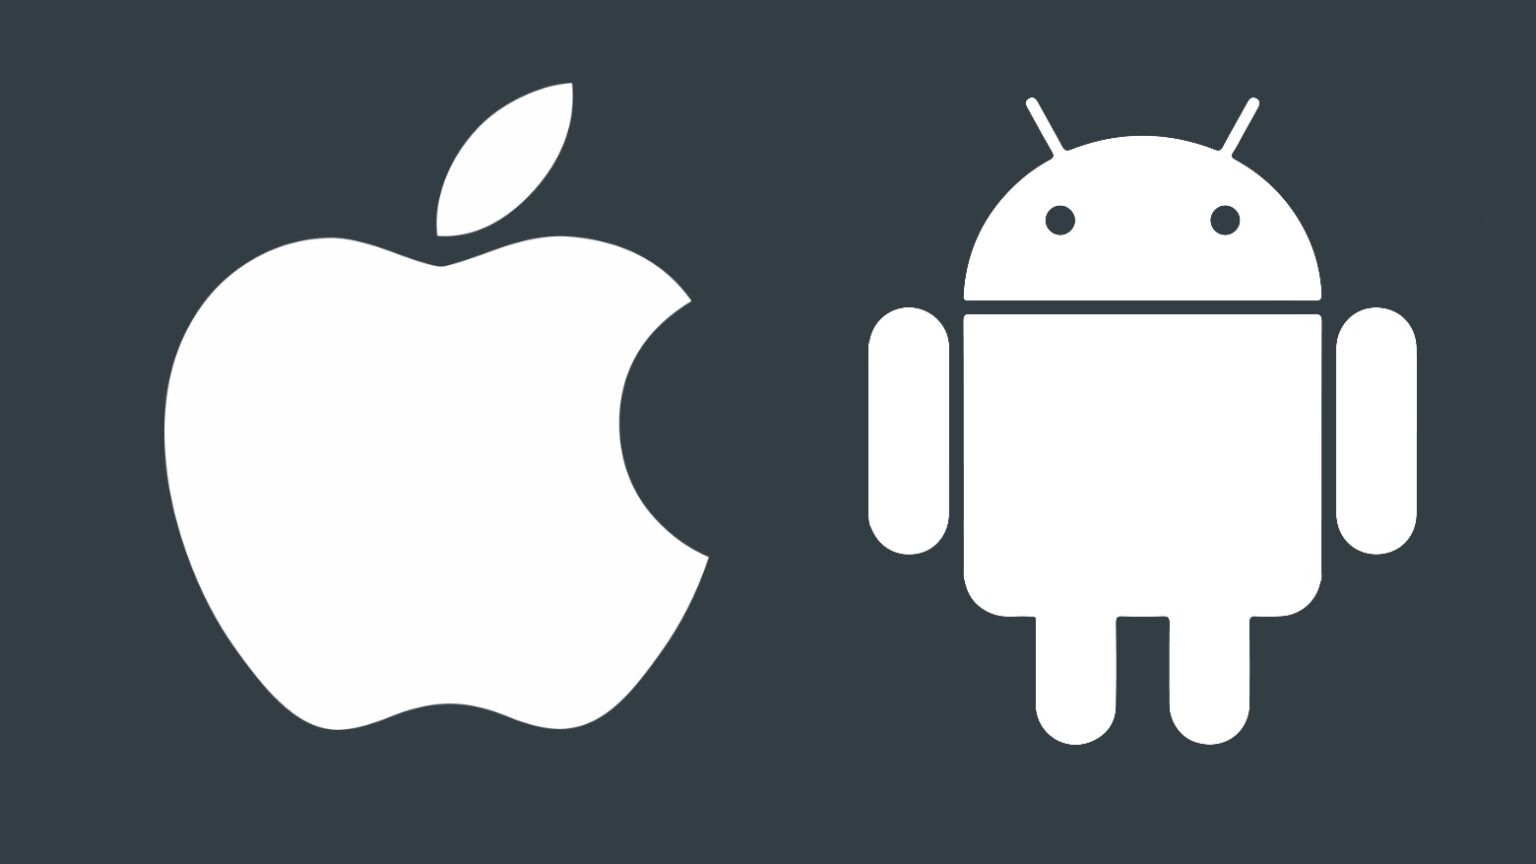 If you switched from an Android device to an iPhone, what would be your reason?